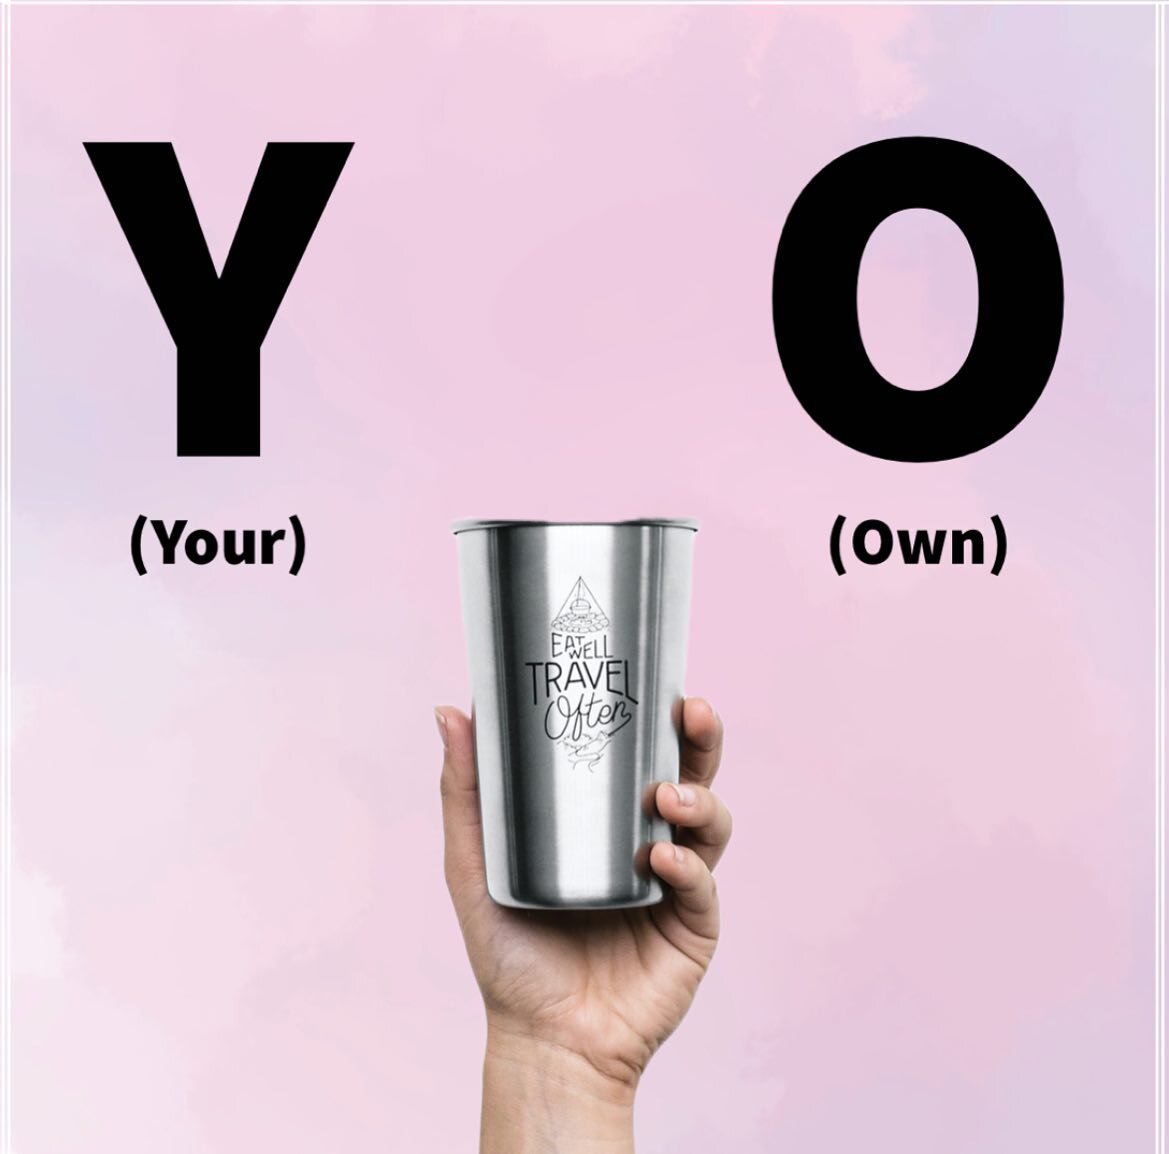 BYOC 🌎

Waste is a choice.

Here at Nomad we operate a Bring Your Own Cup policy for all takeout drinks.

We offer a deposit cup system, mug washing station and retail reusable cups in store.

To check out more about what we do, take a look at the l